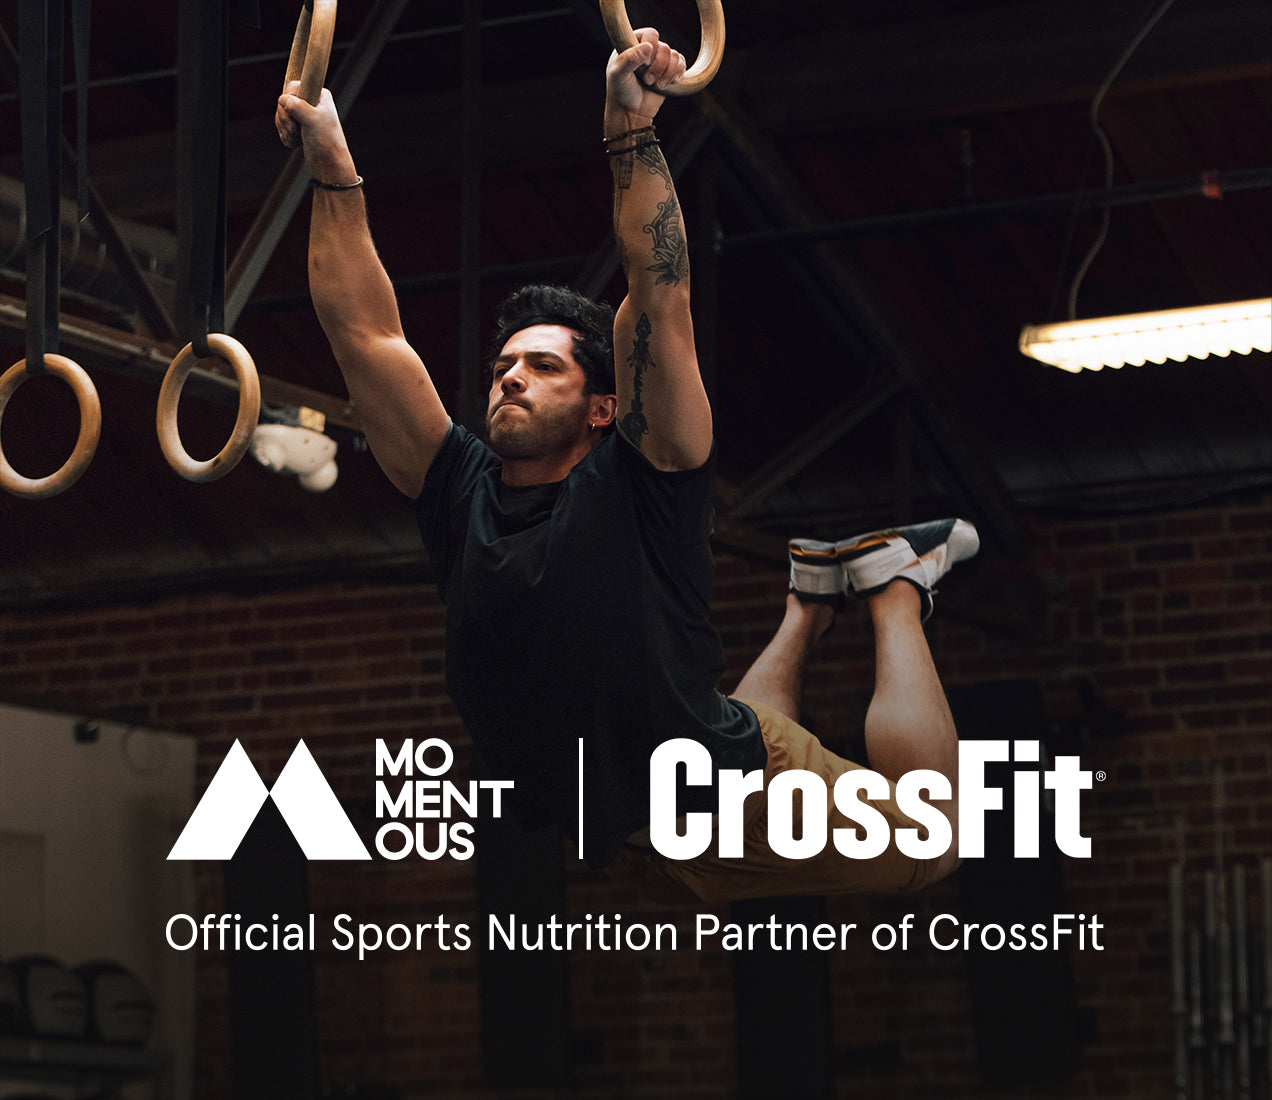 CrossFit and Momentous Unite to Form a Game-Changing Partnership